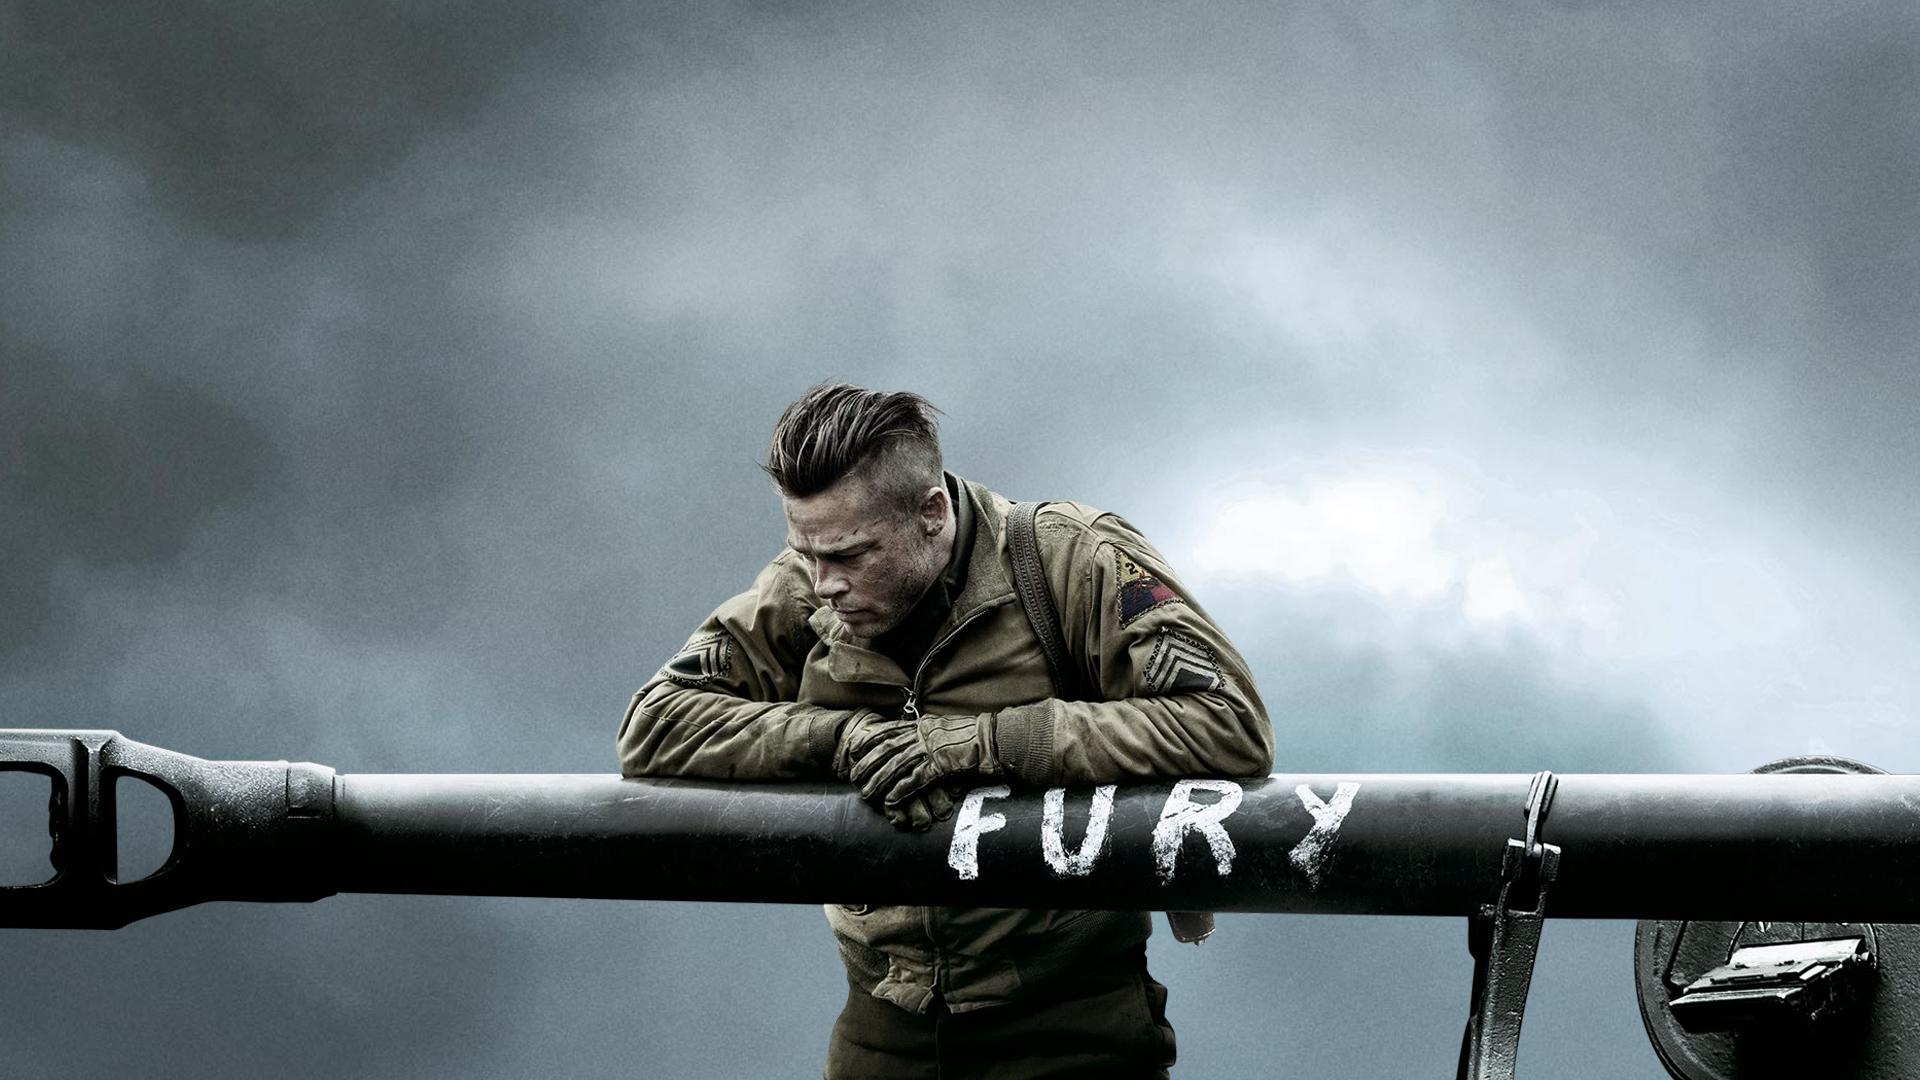 fury wallpaper,human,photography,muscle,cloud,soldier